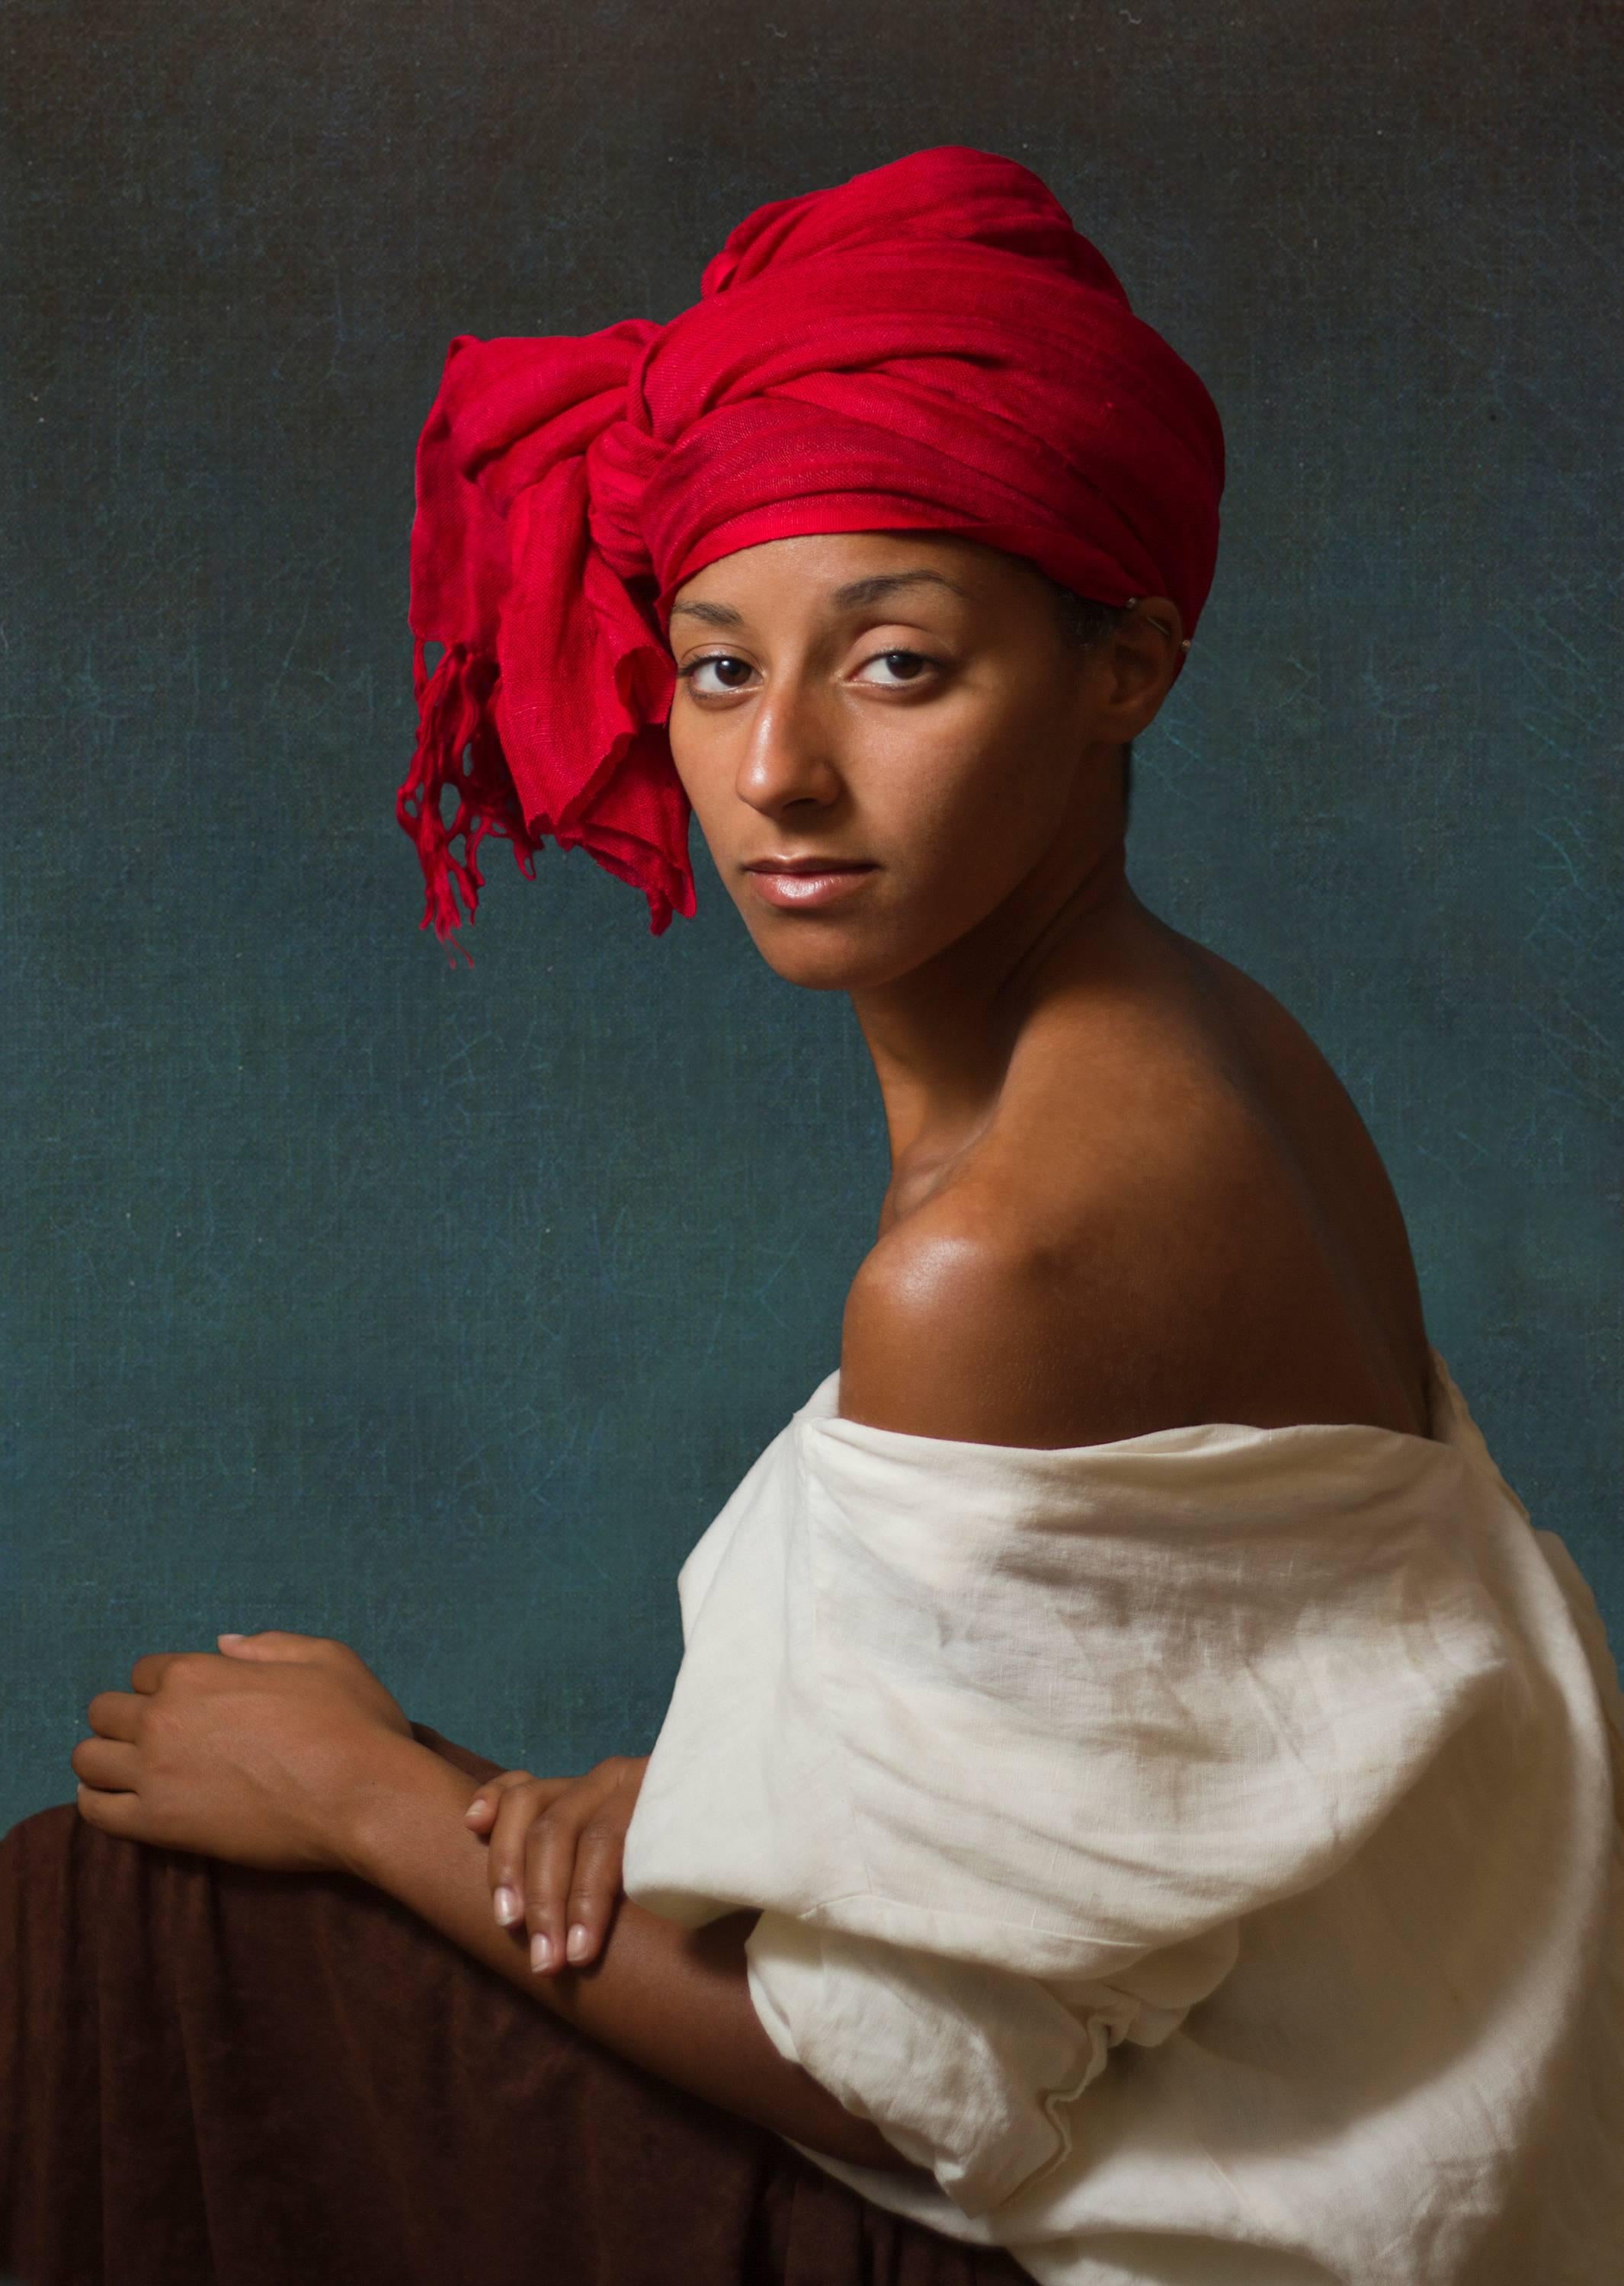 E2 - Kleinveld & Julien Portrait Photograph - Ode to Aman's Creole with a Red Headdress